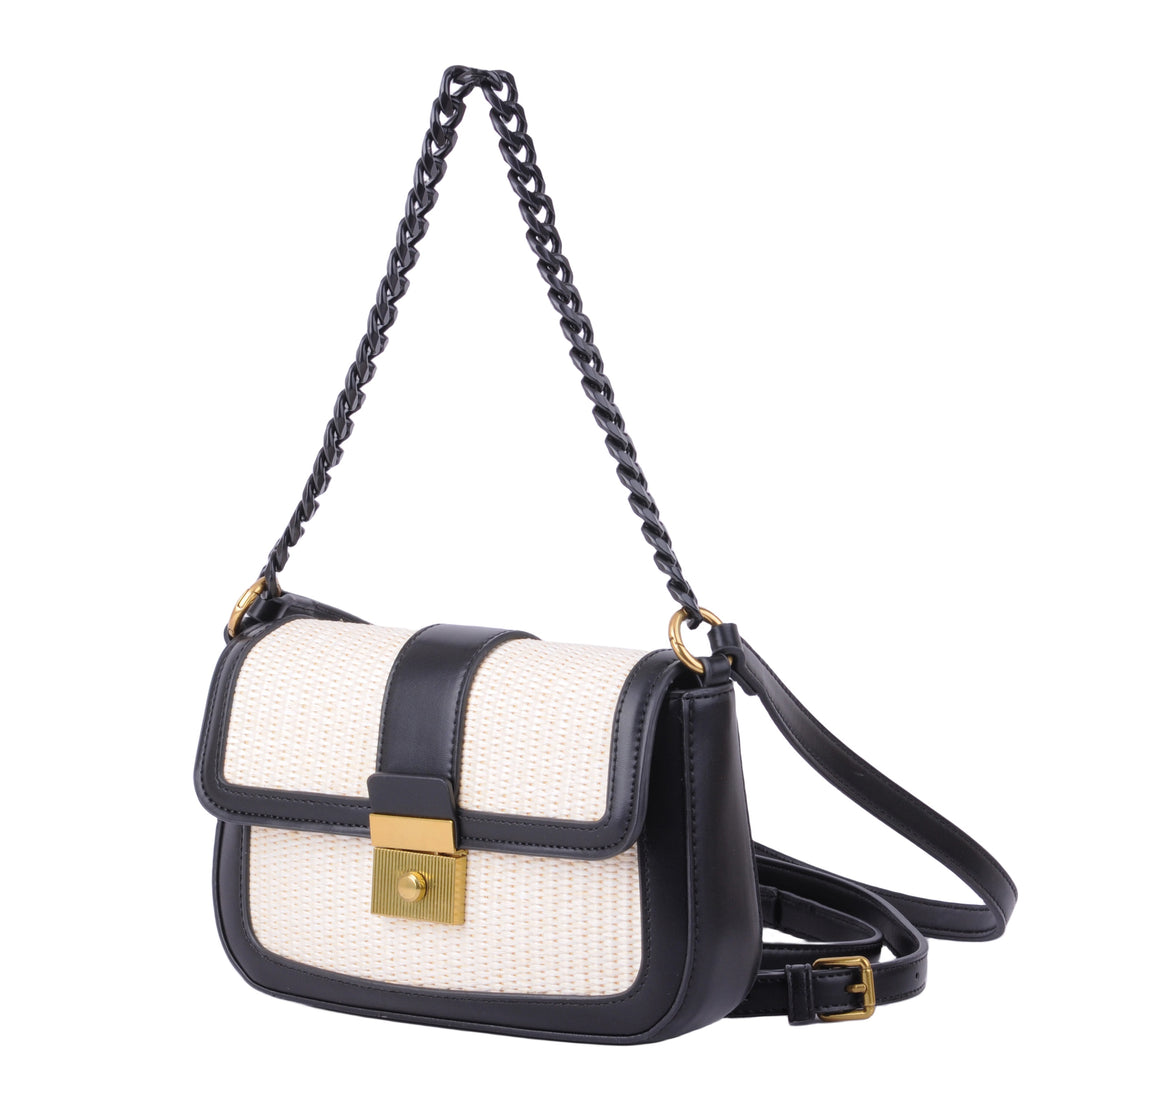 1635 - Rustic Chic: Raffia Crossbody with PU Trims and Matching Smooth Heavy Chain